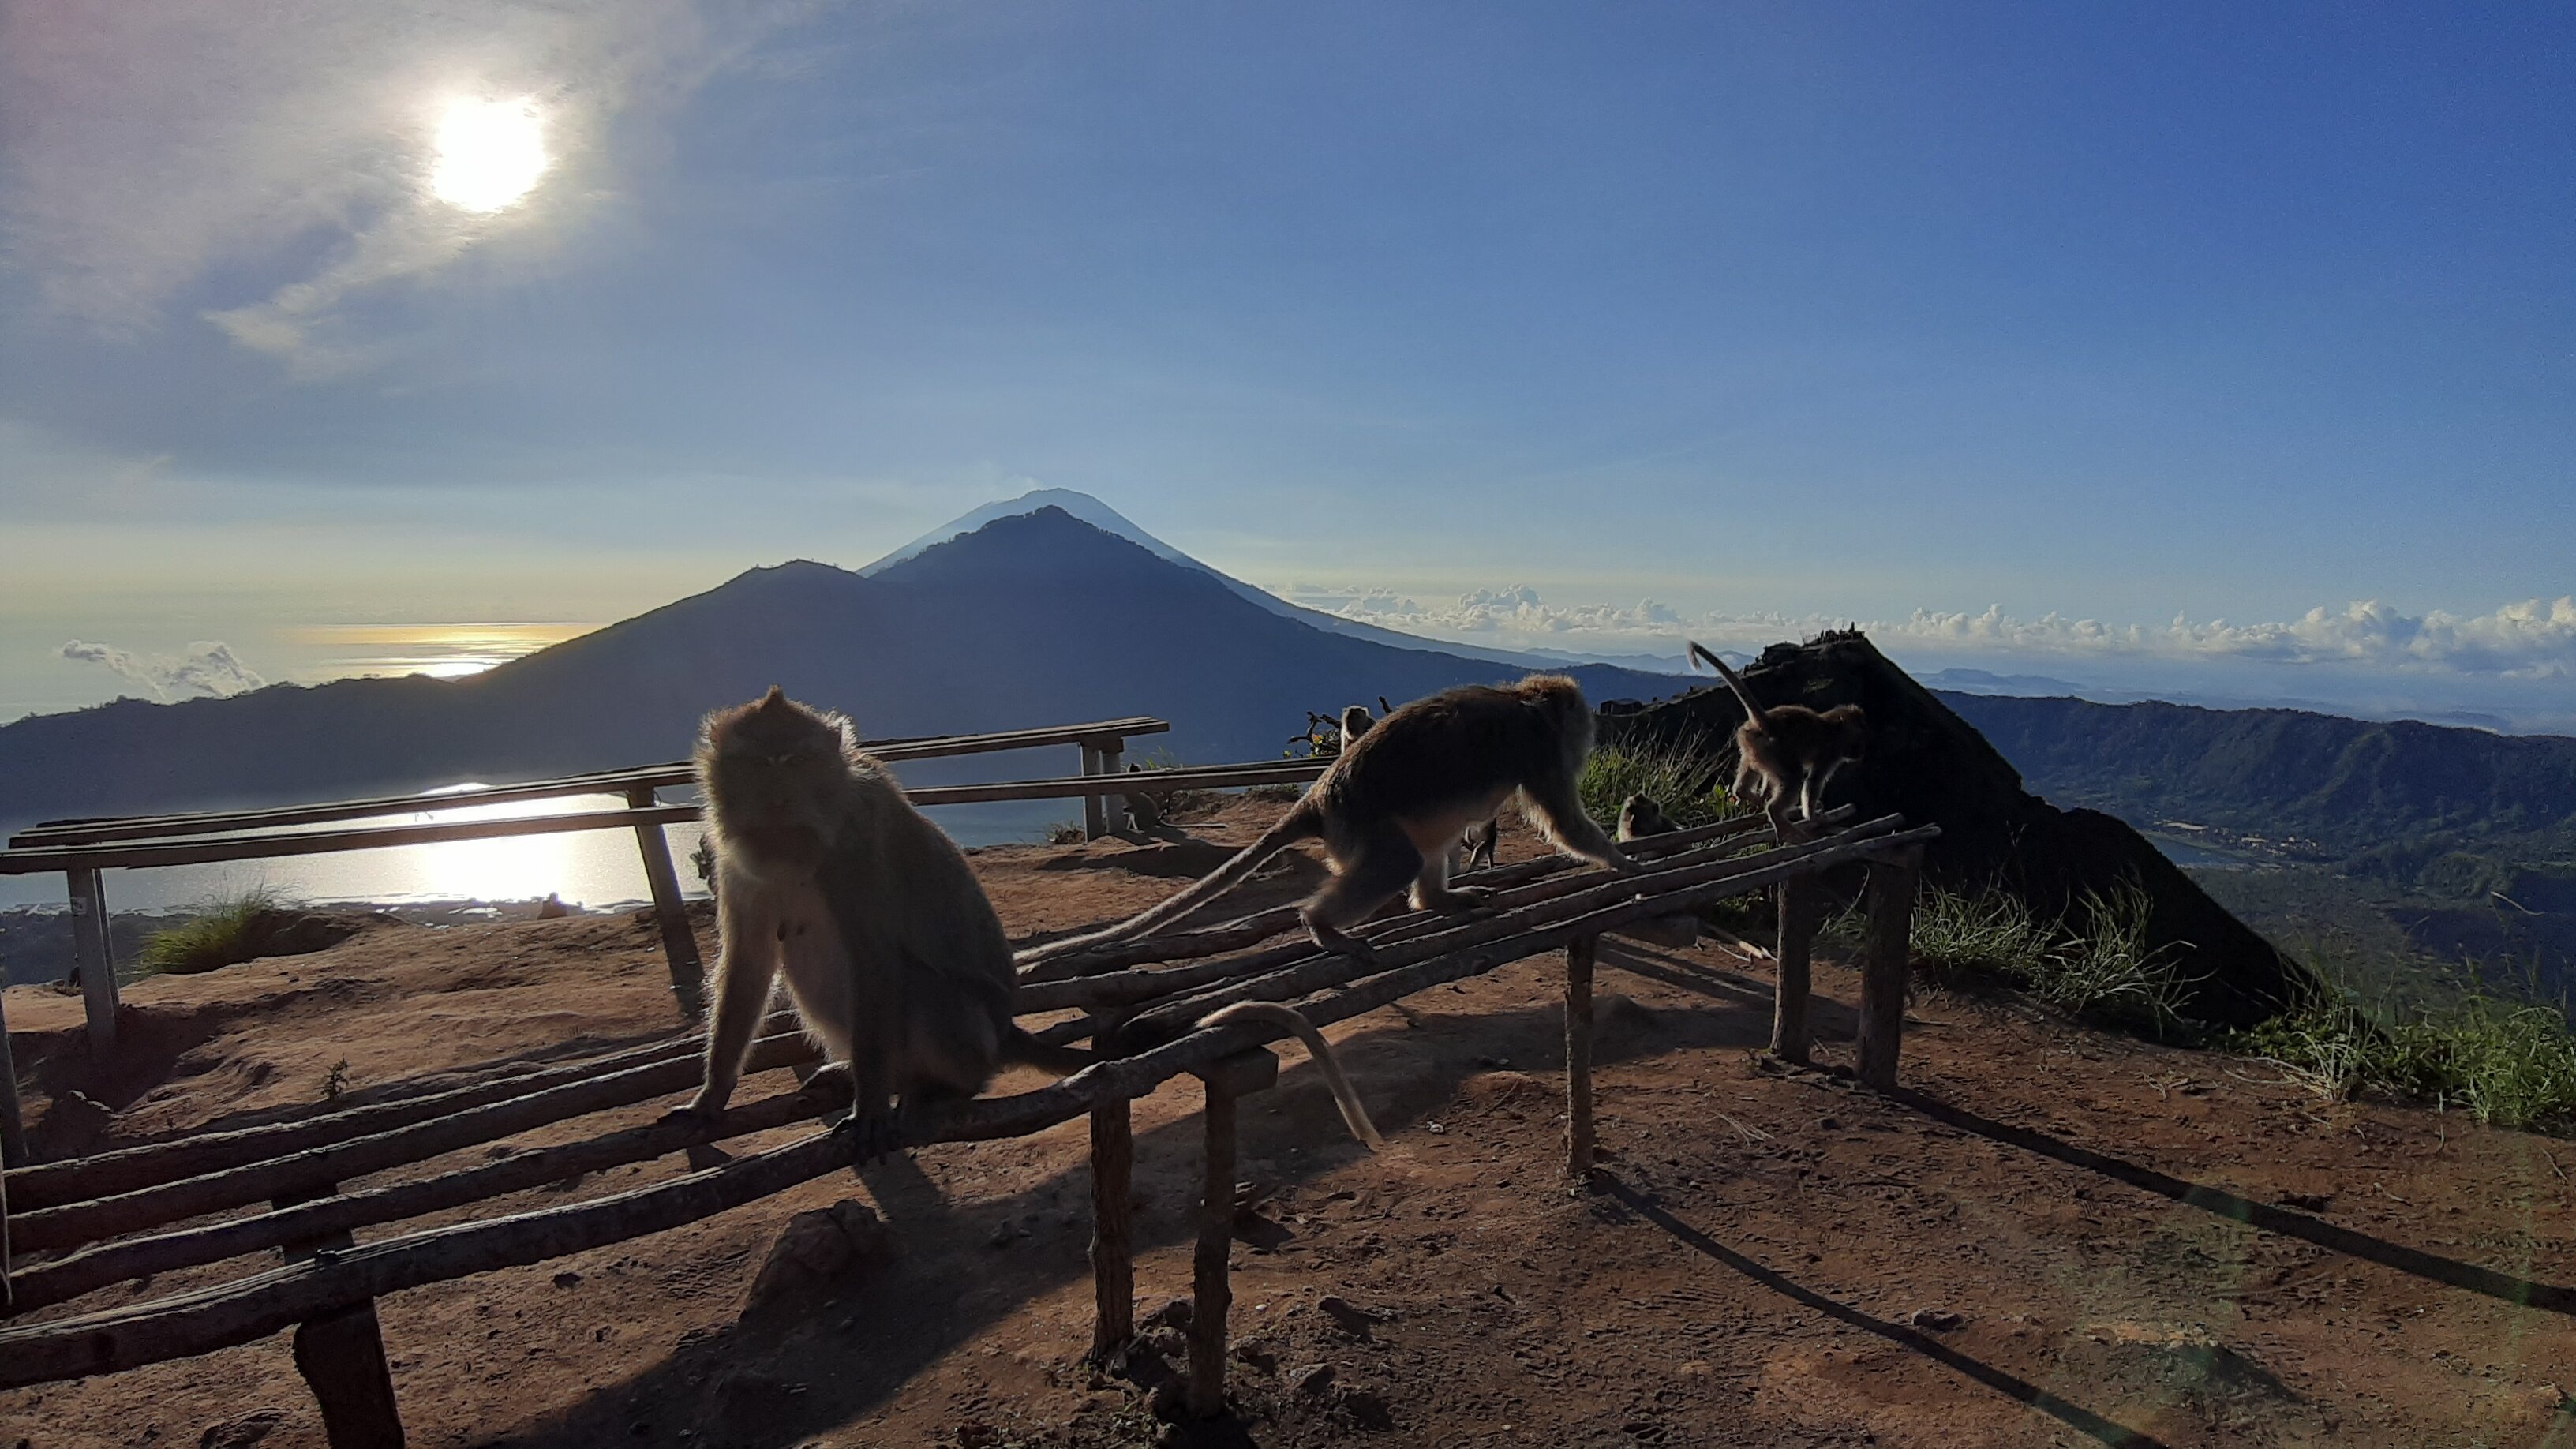 A family of monkeys took over all of the benches.